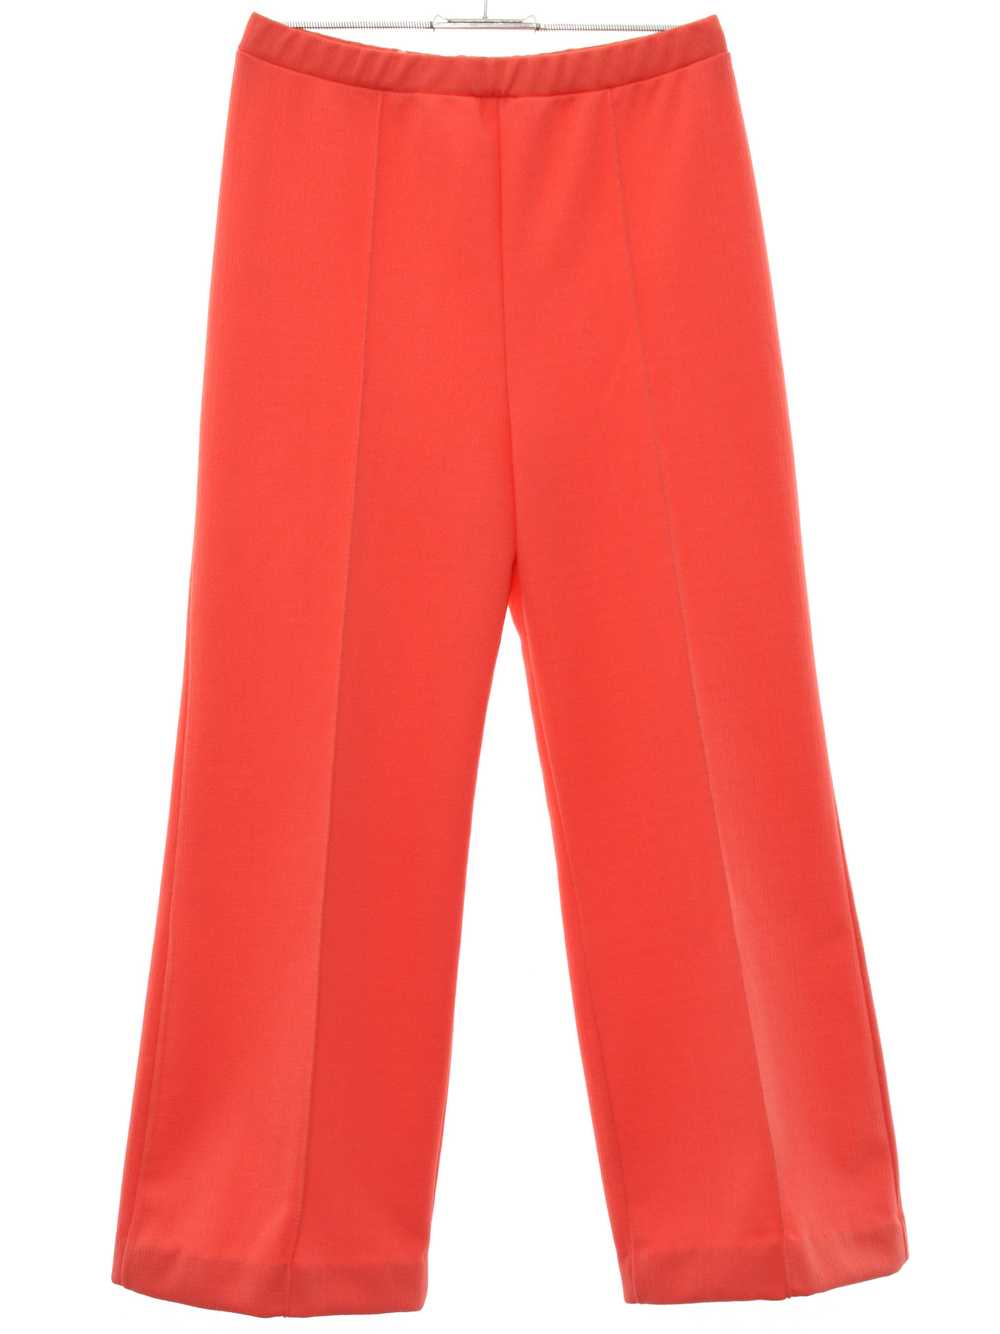 1970's Womens Flared Knit Pants - image 1